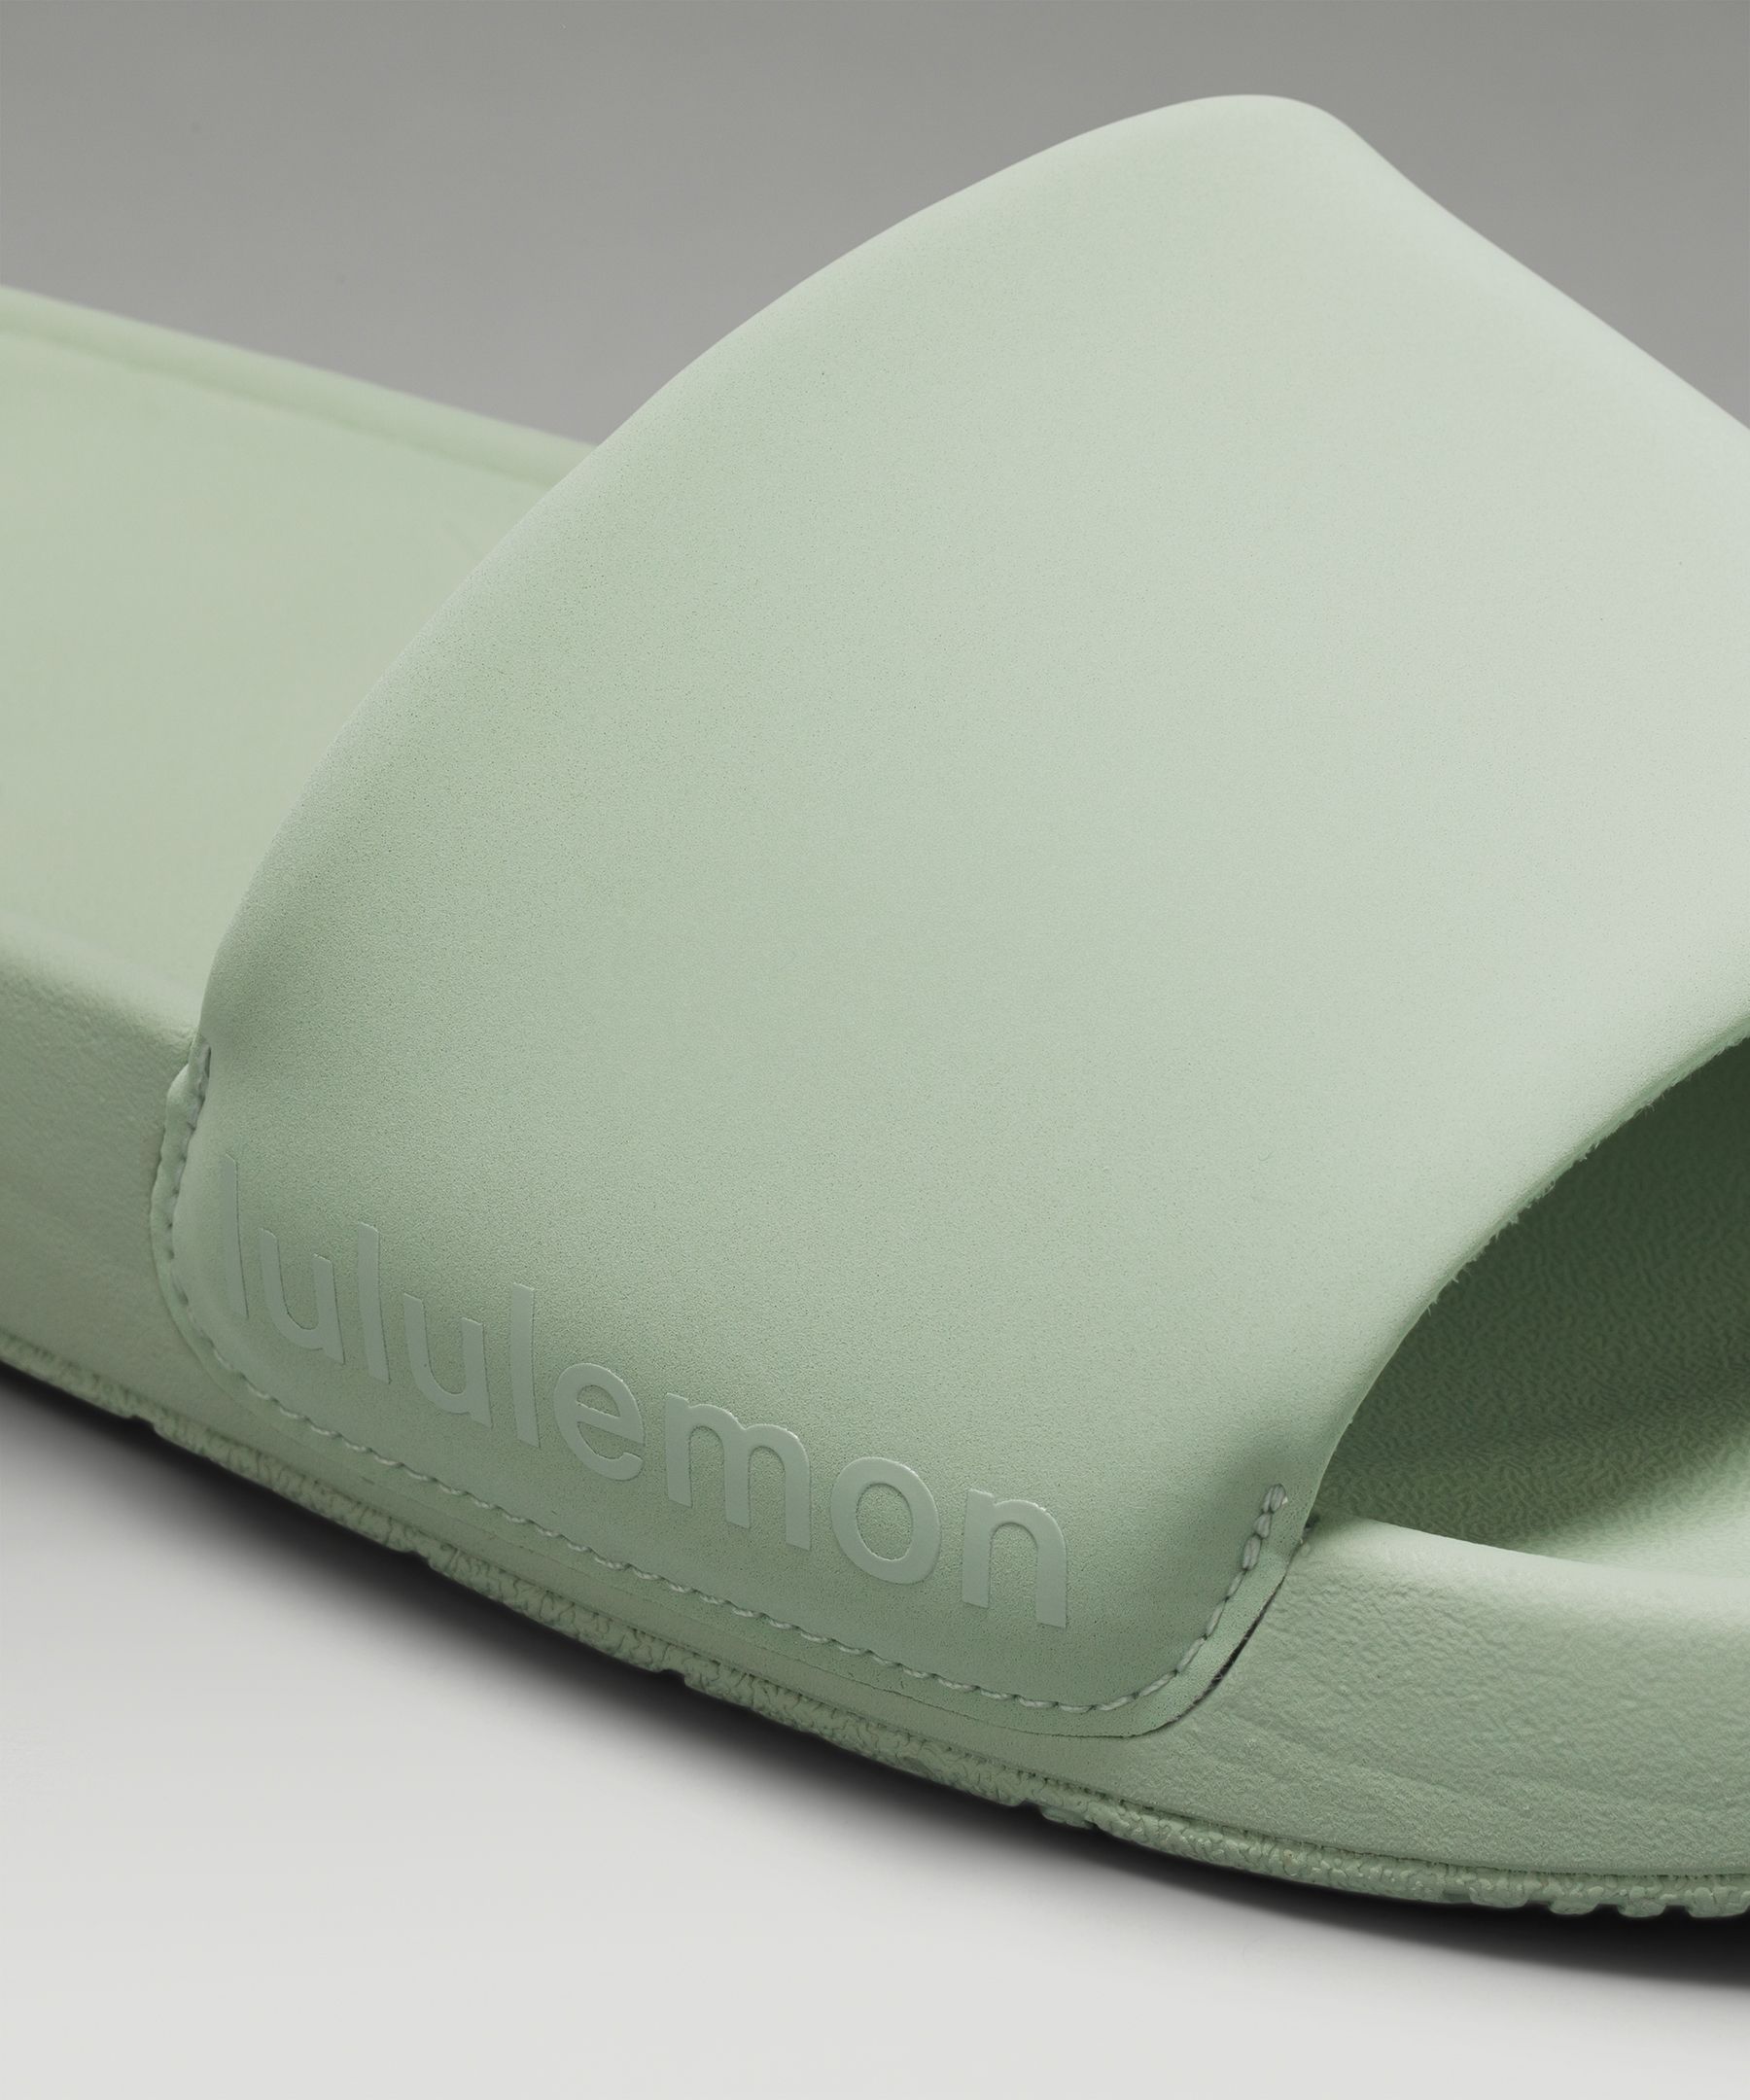 Where to buy new lululemon Cityverse sneakers and Restfeel slides 